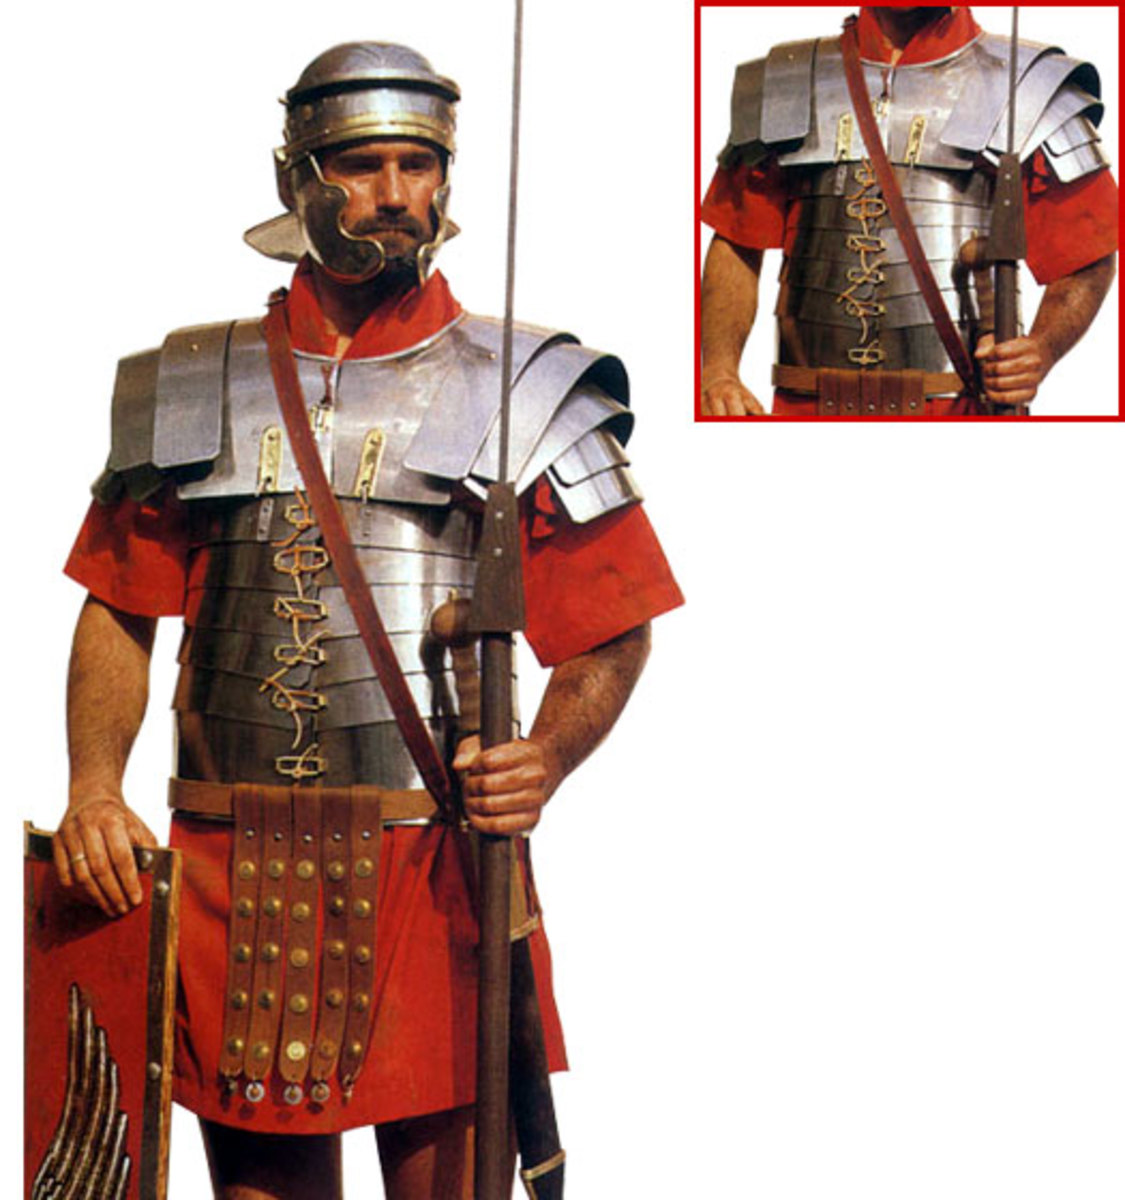 spur Individuality Squirrel The Roman Empire Army and The Legions, Uniform & Armor Information, Images,  Weaponry - HubPages